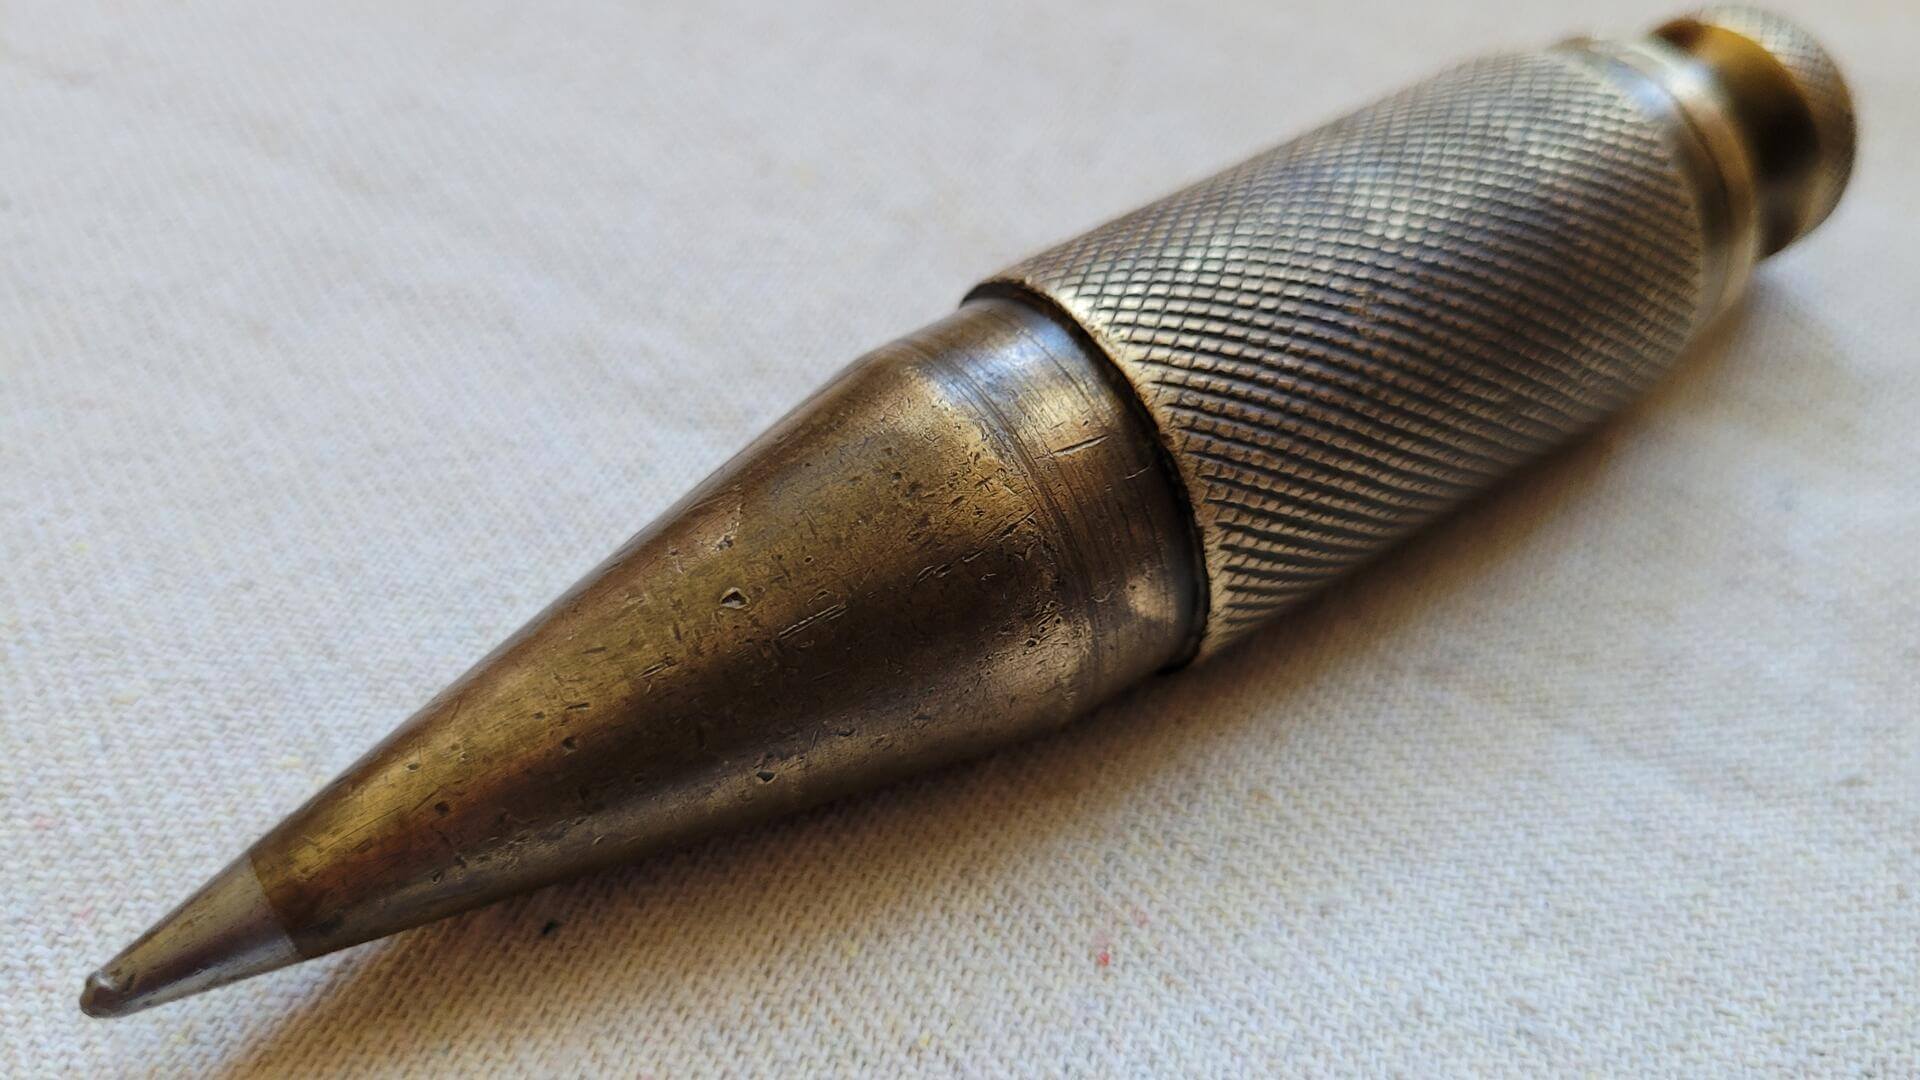 Vintage Solid Brass Knurled Plumb Bob w Steel Point Tip 5 Inches / 380 grams / 13.4 oz - Antique carpenter and stone mason marking and measuring tools